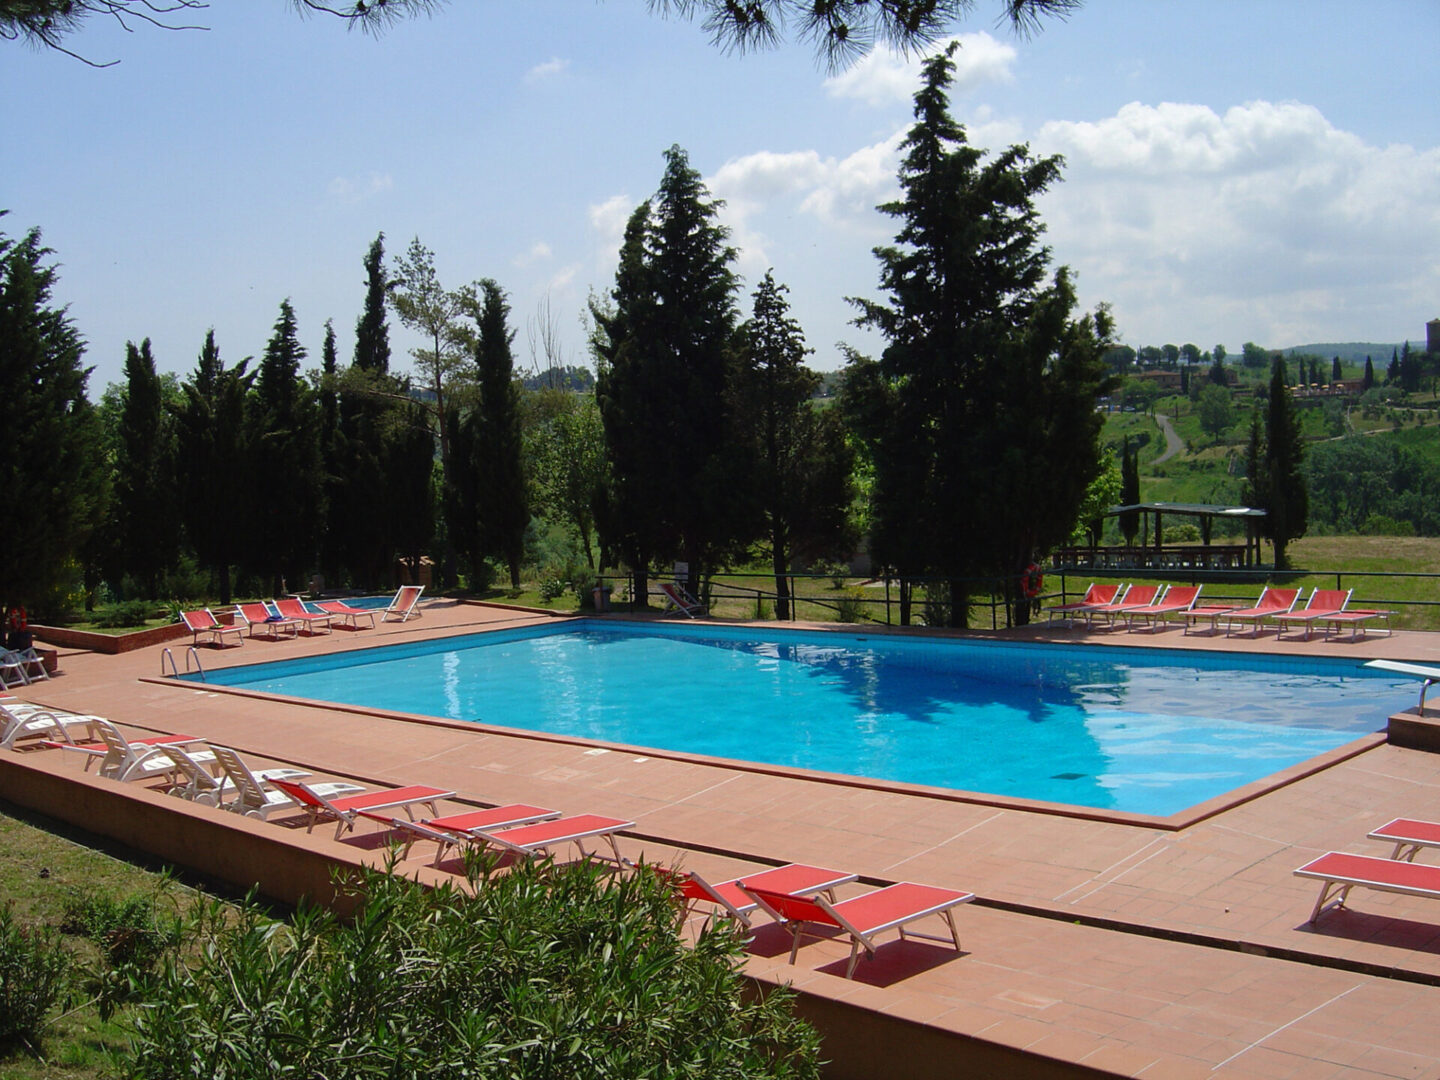 A pool with red chairs and trees in the background